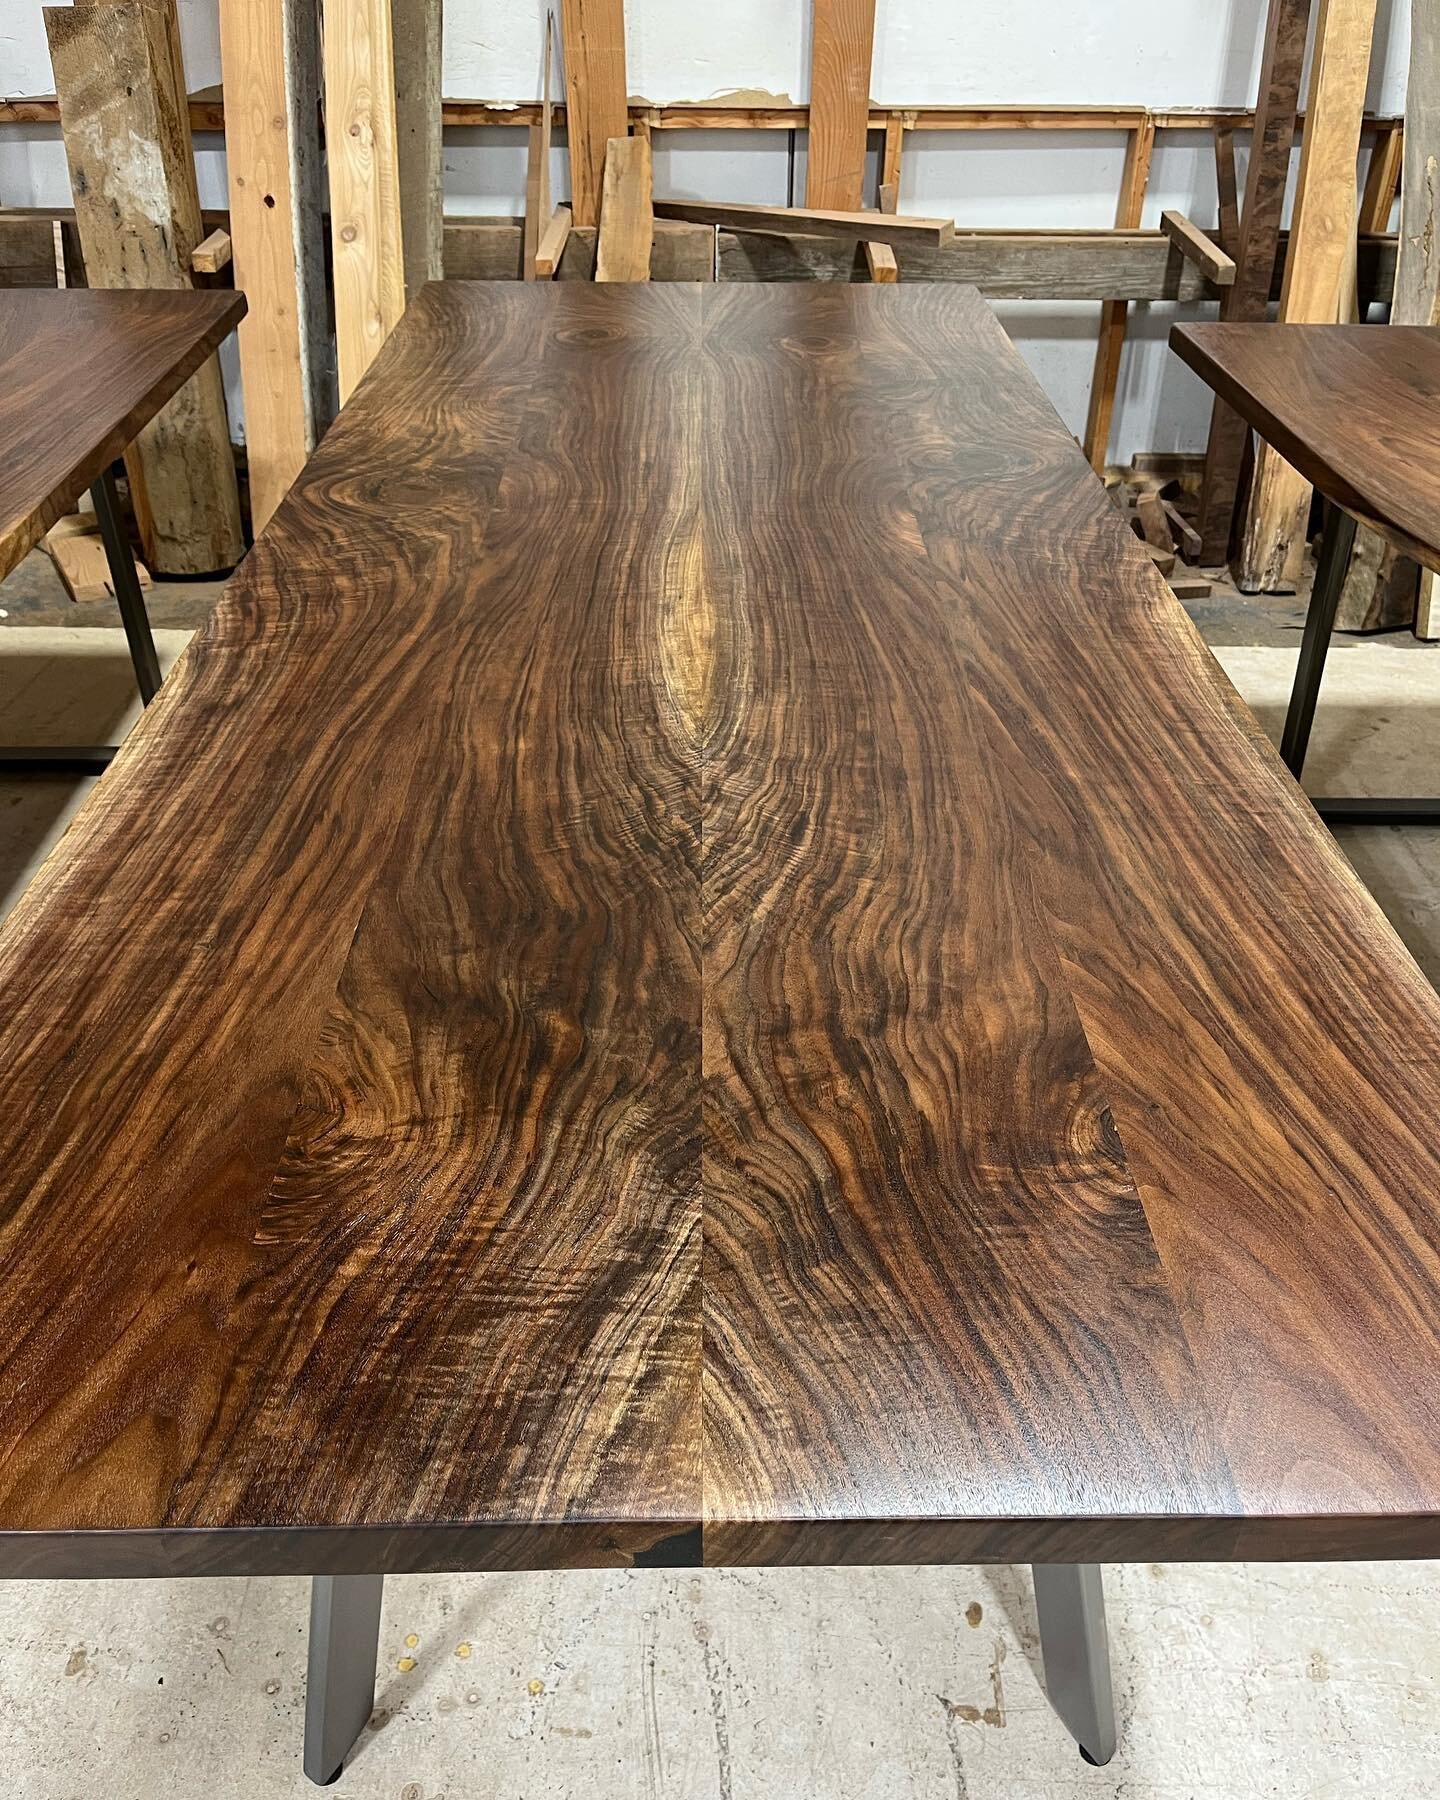 Less than a week to go in the spring sale. Check out stumptownreclaimed.com for some incredible tables at our best prices of the year. Offer applies to custom pieces and already finished tables like this new 8&rsquo; walnut stunner on brushed steel b